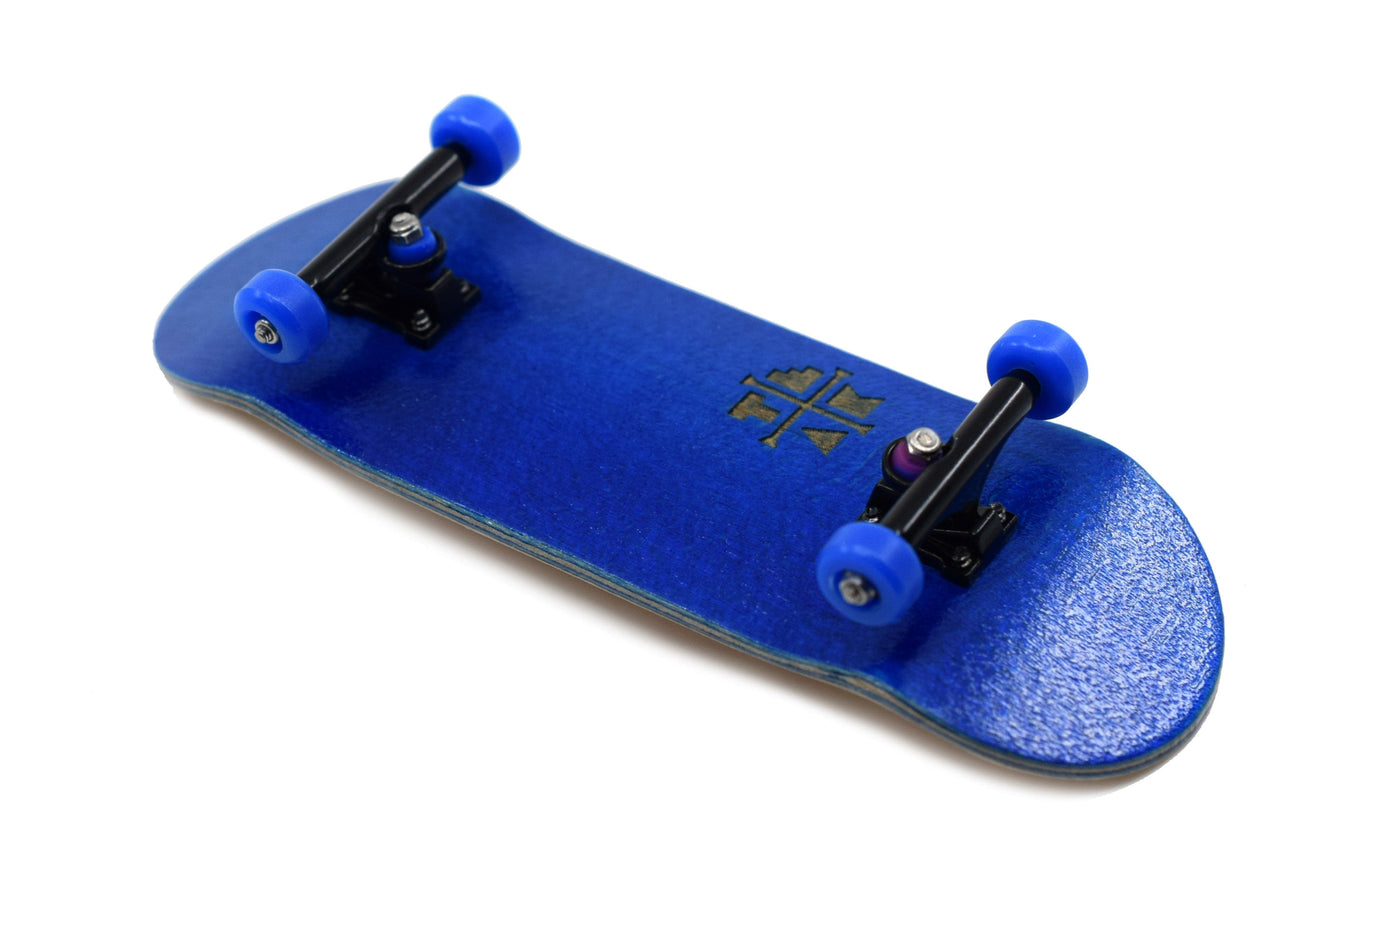 Teak Tuning PROlific Complete with Prodigy Trucks - "The Midnight Blues" Edition